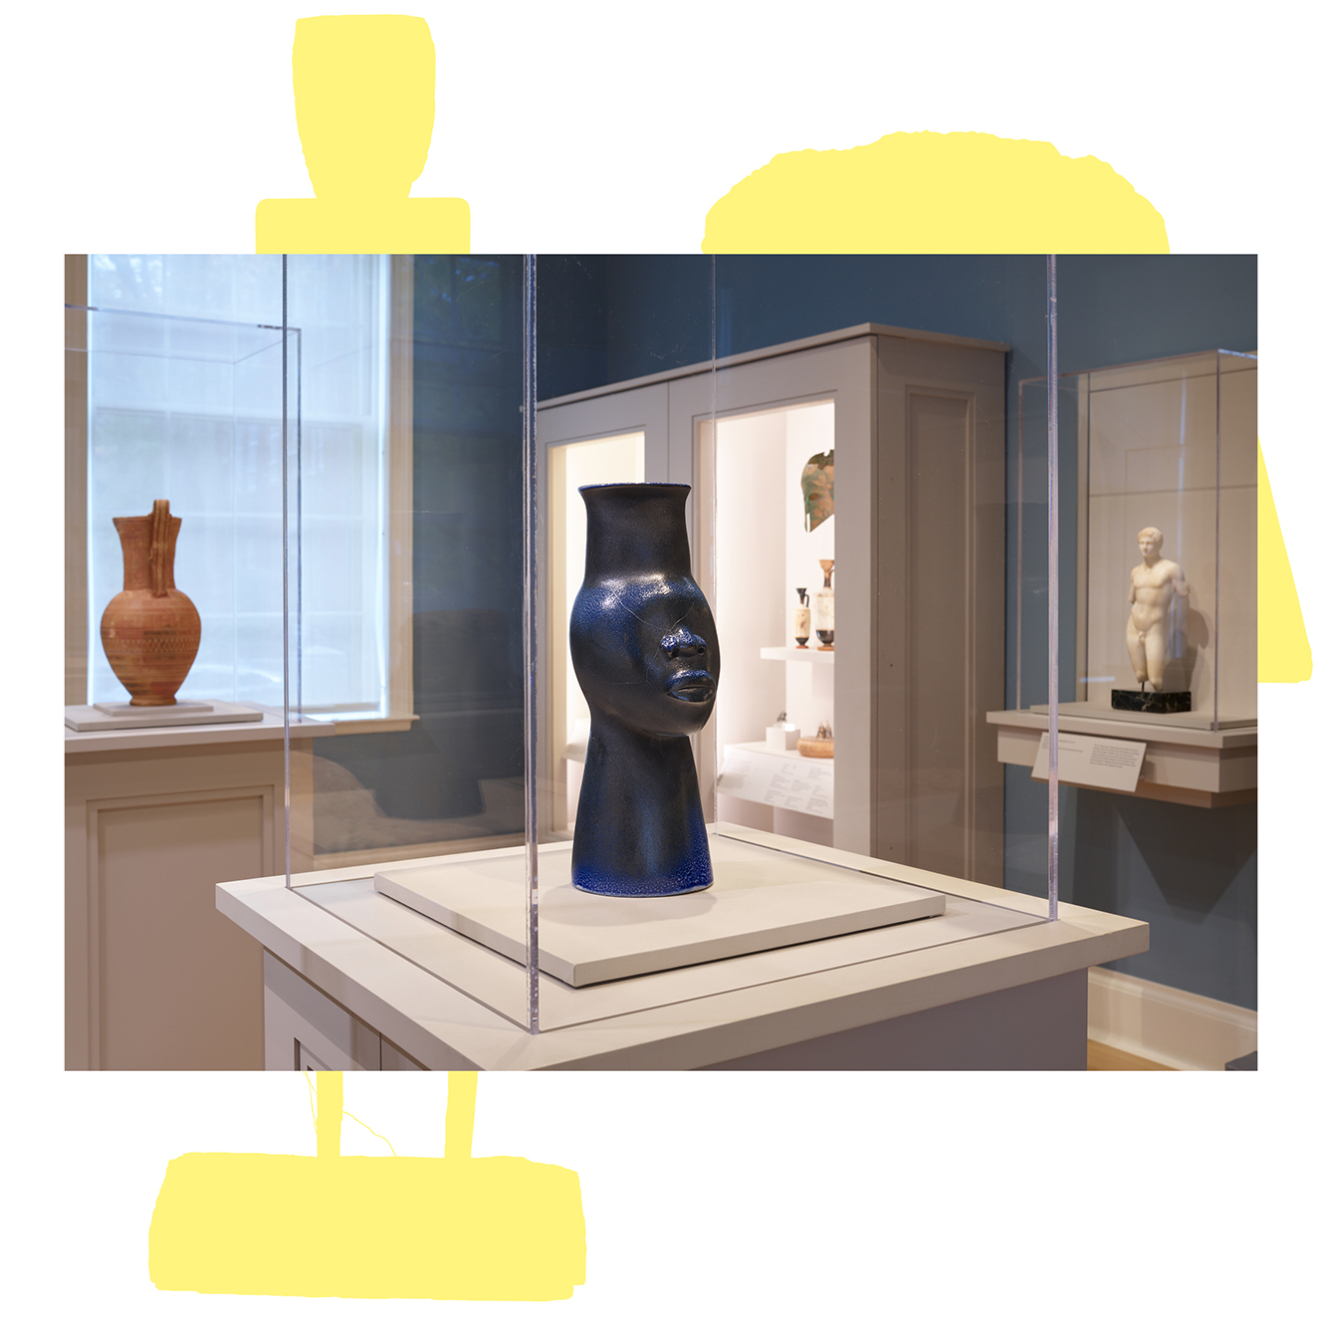 In a case in a gallery’s center is a sleek black vessel shaped like a stylized head with an elongated neck. Cases along the perimeter contain other objects.